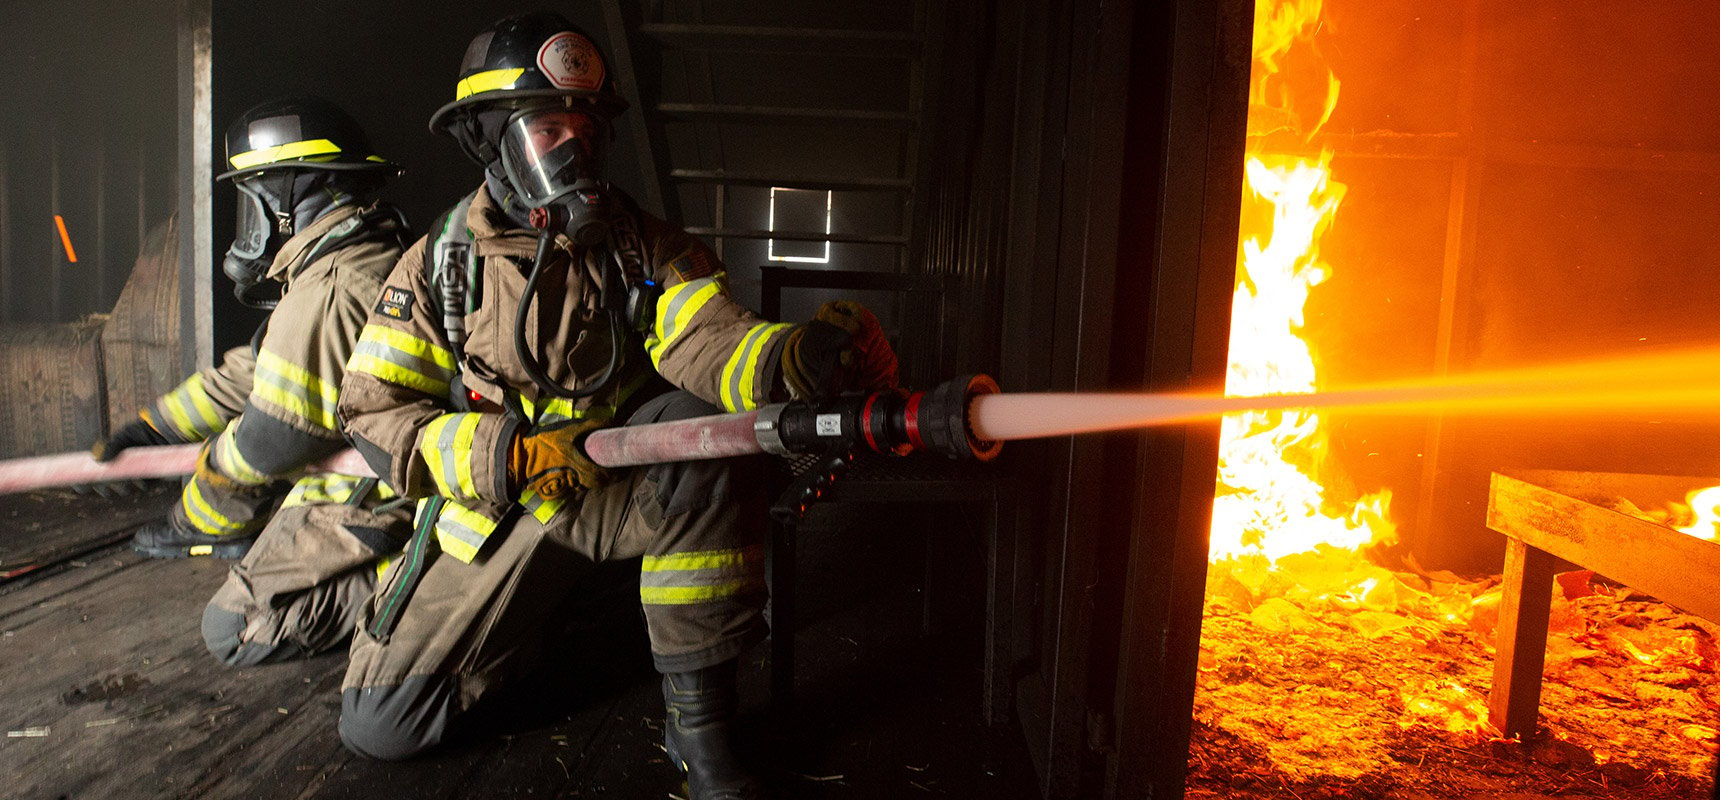 Two firefighters in full gear battle a blaze using a straight tip nozzle.